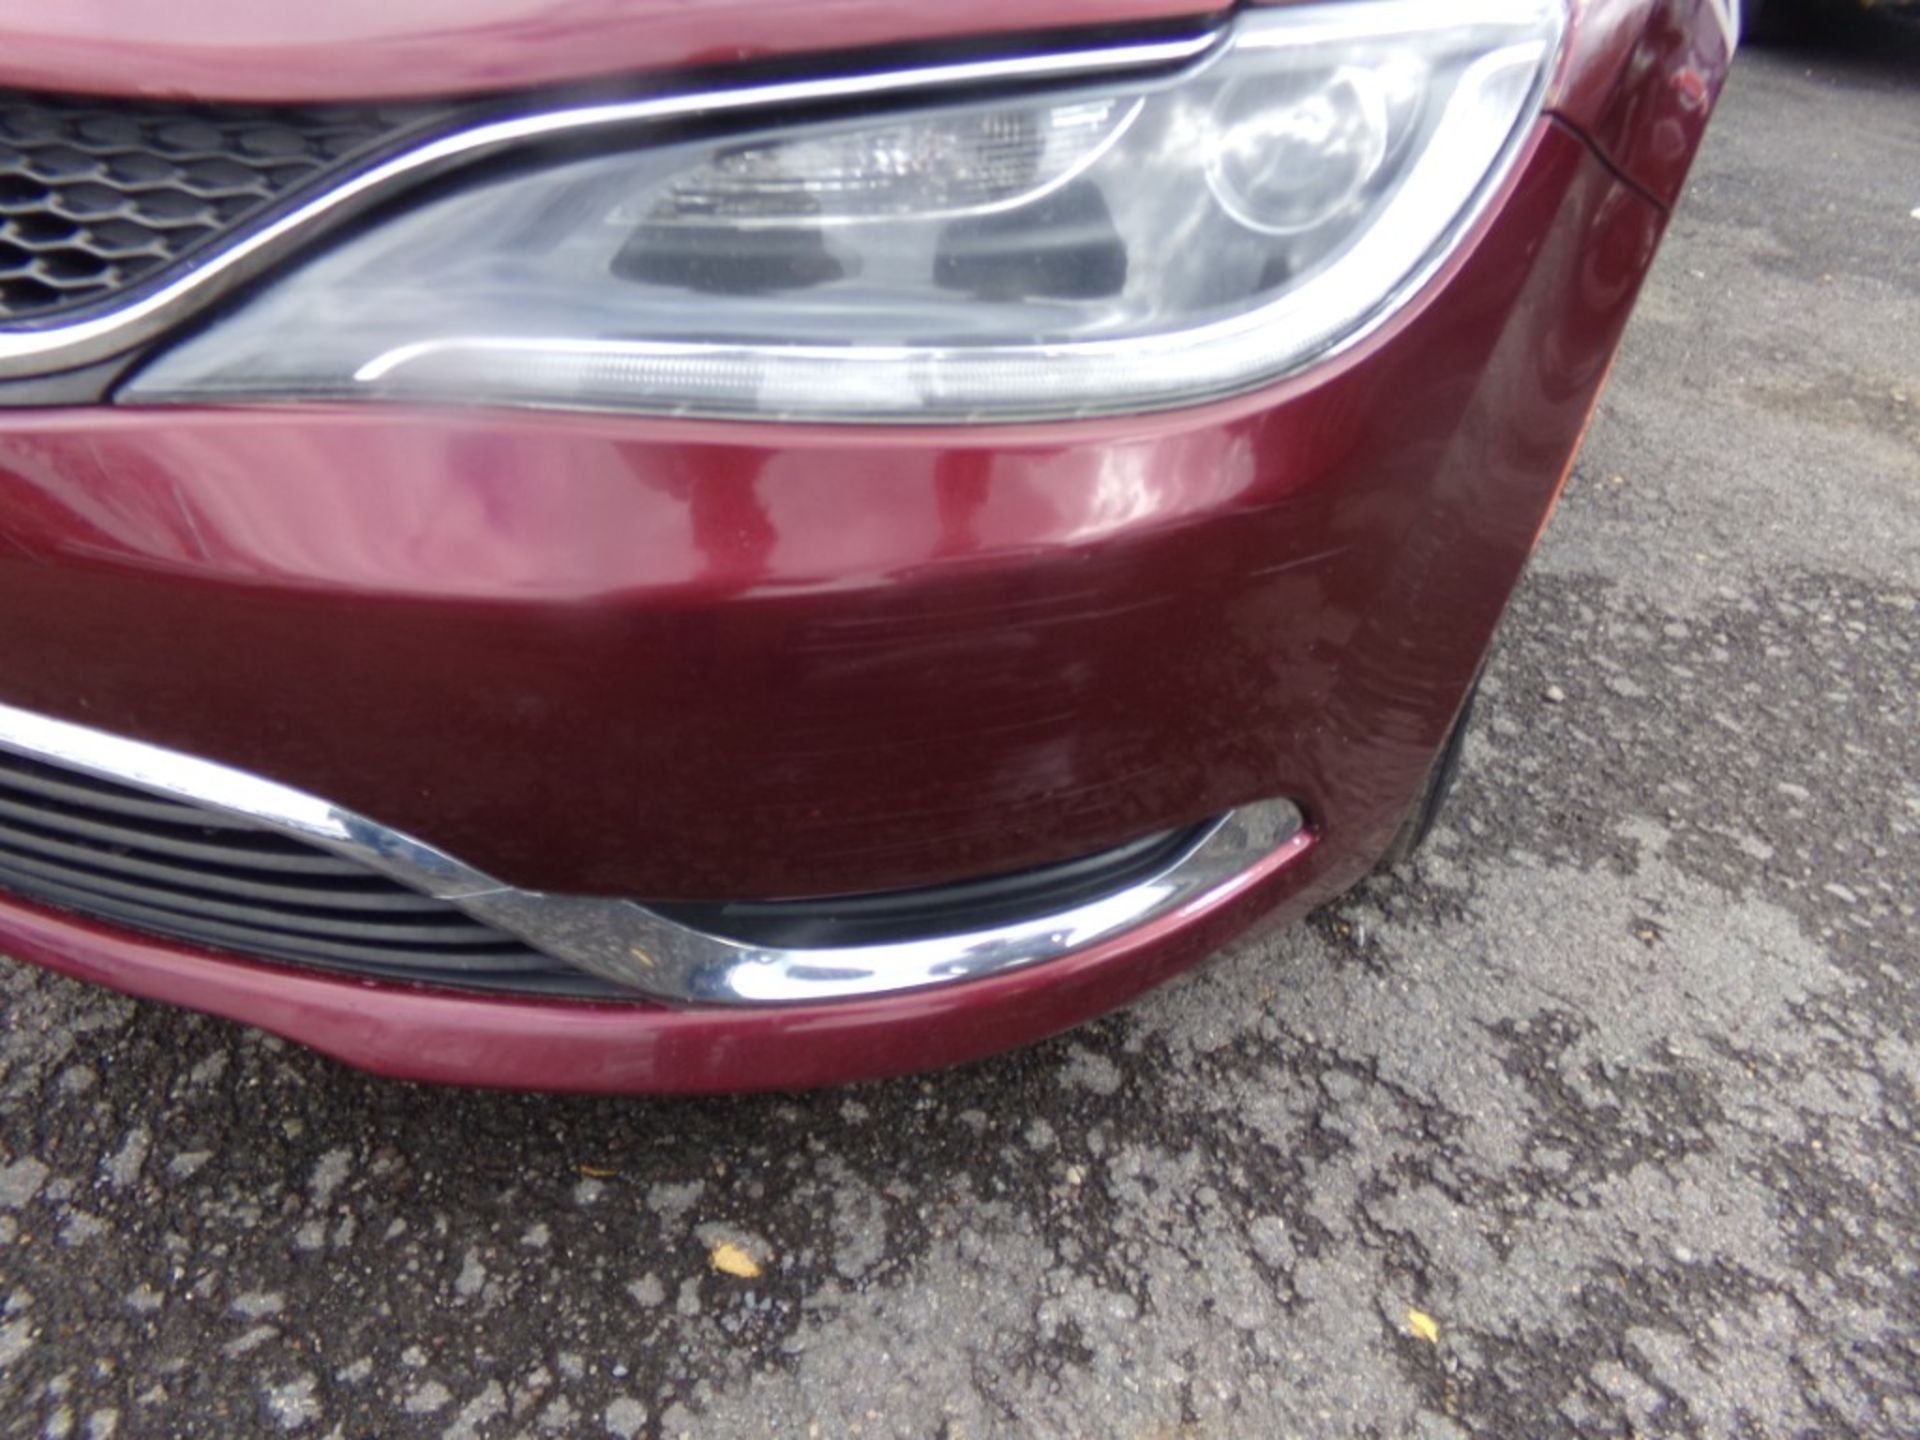 2015 Chrysler 200 Limited, Maroon, 137,543 Miles, VIN# 1C3CCCAB0FN591551, FRONT BUMPER COVER HAS - Image 5 of 8